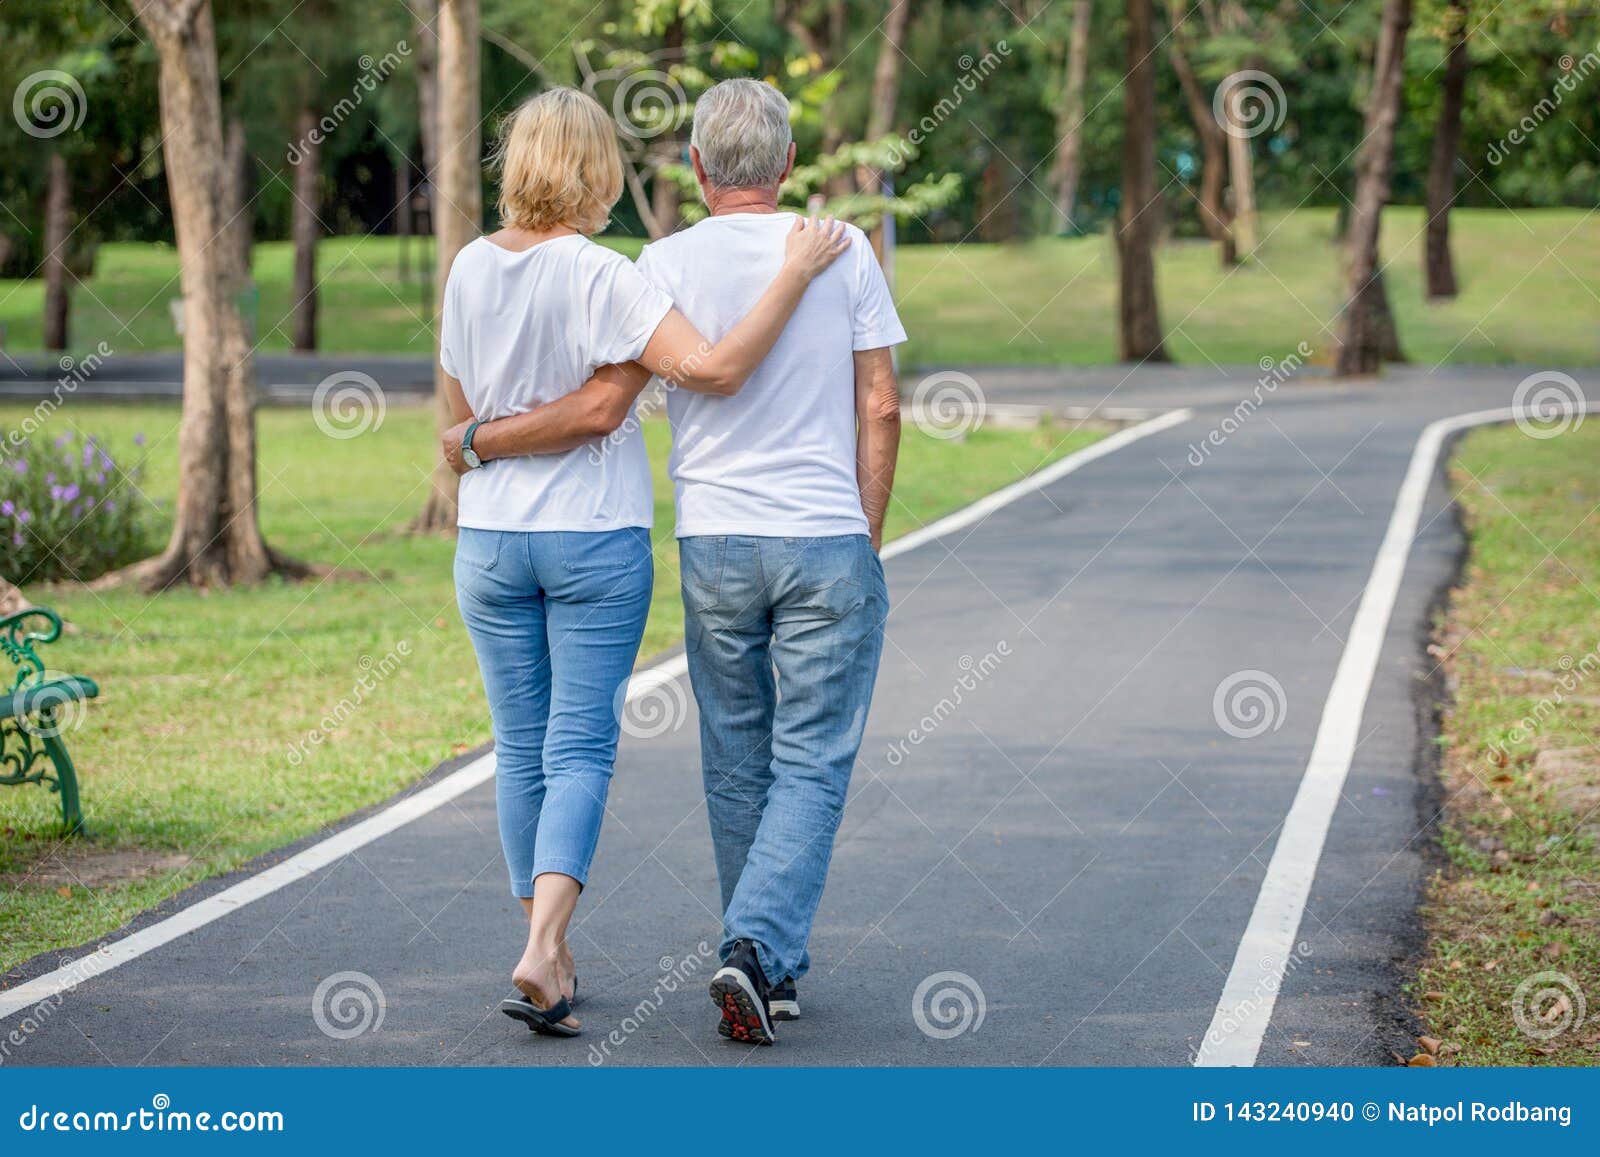 happy senior loving couple relaxing at park embracing and walking together in morning time. old people  hugging and enjoying